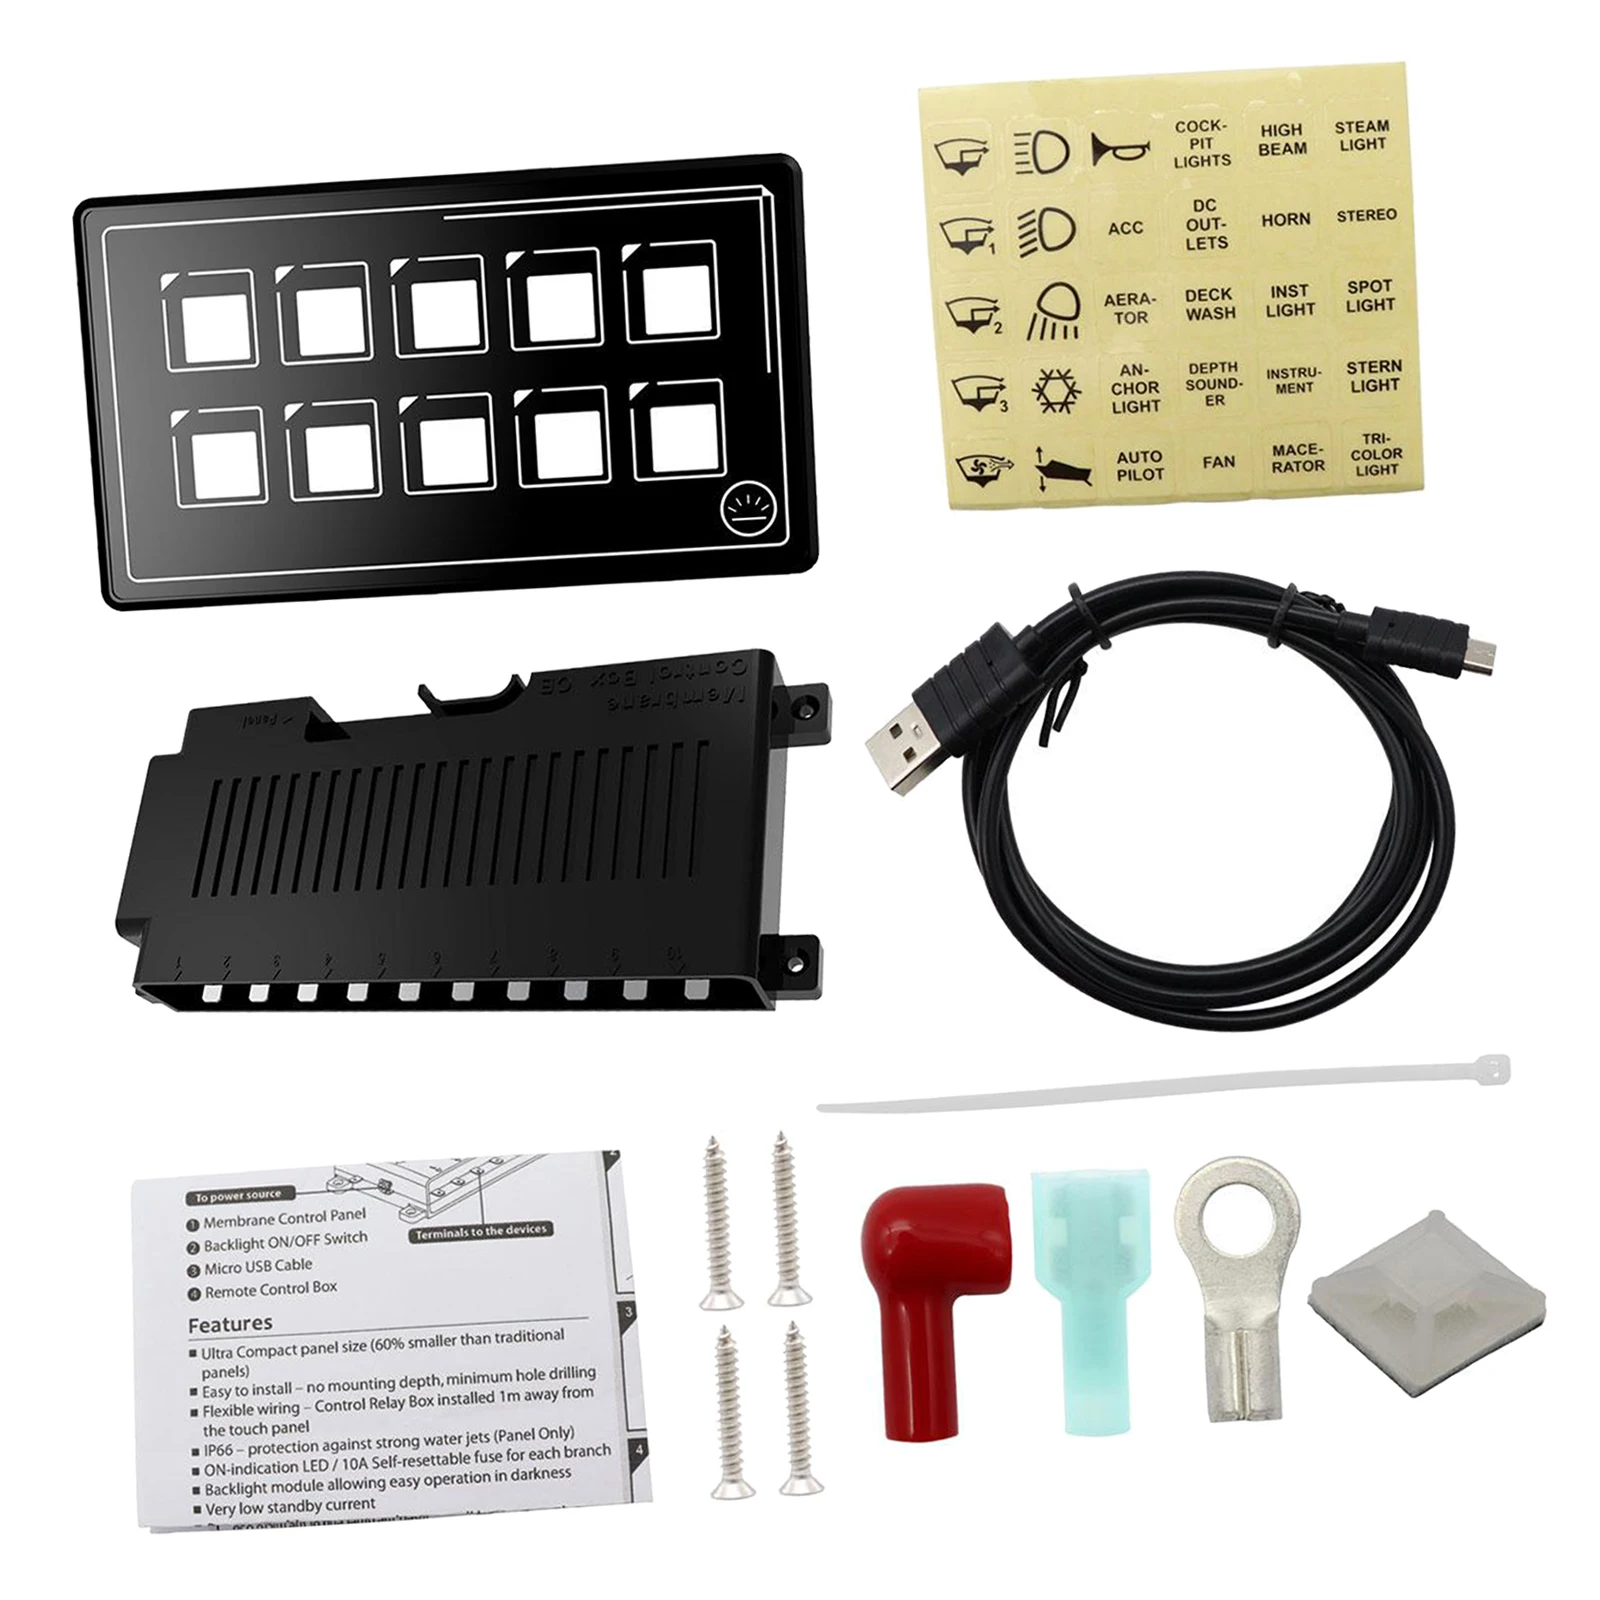 10P Membrane Control Switch Panel w/Backlight Built-in PPTC APP Control Waterproof Universal for Car Boat Truck Marine